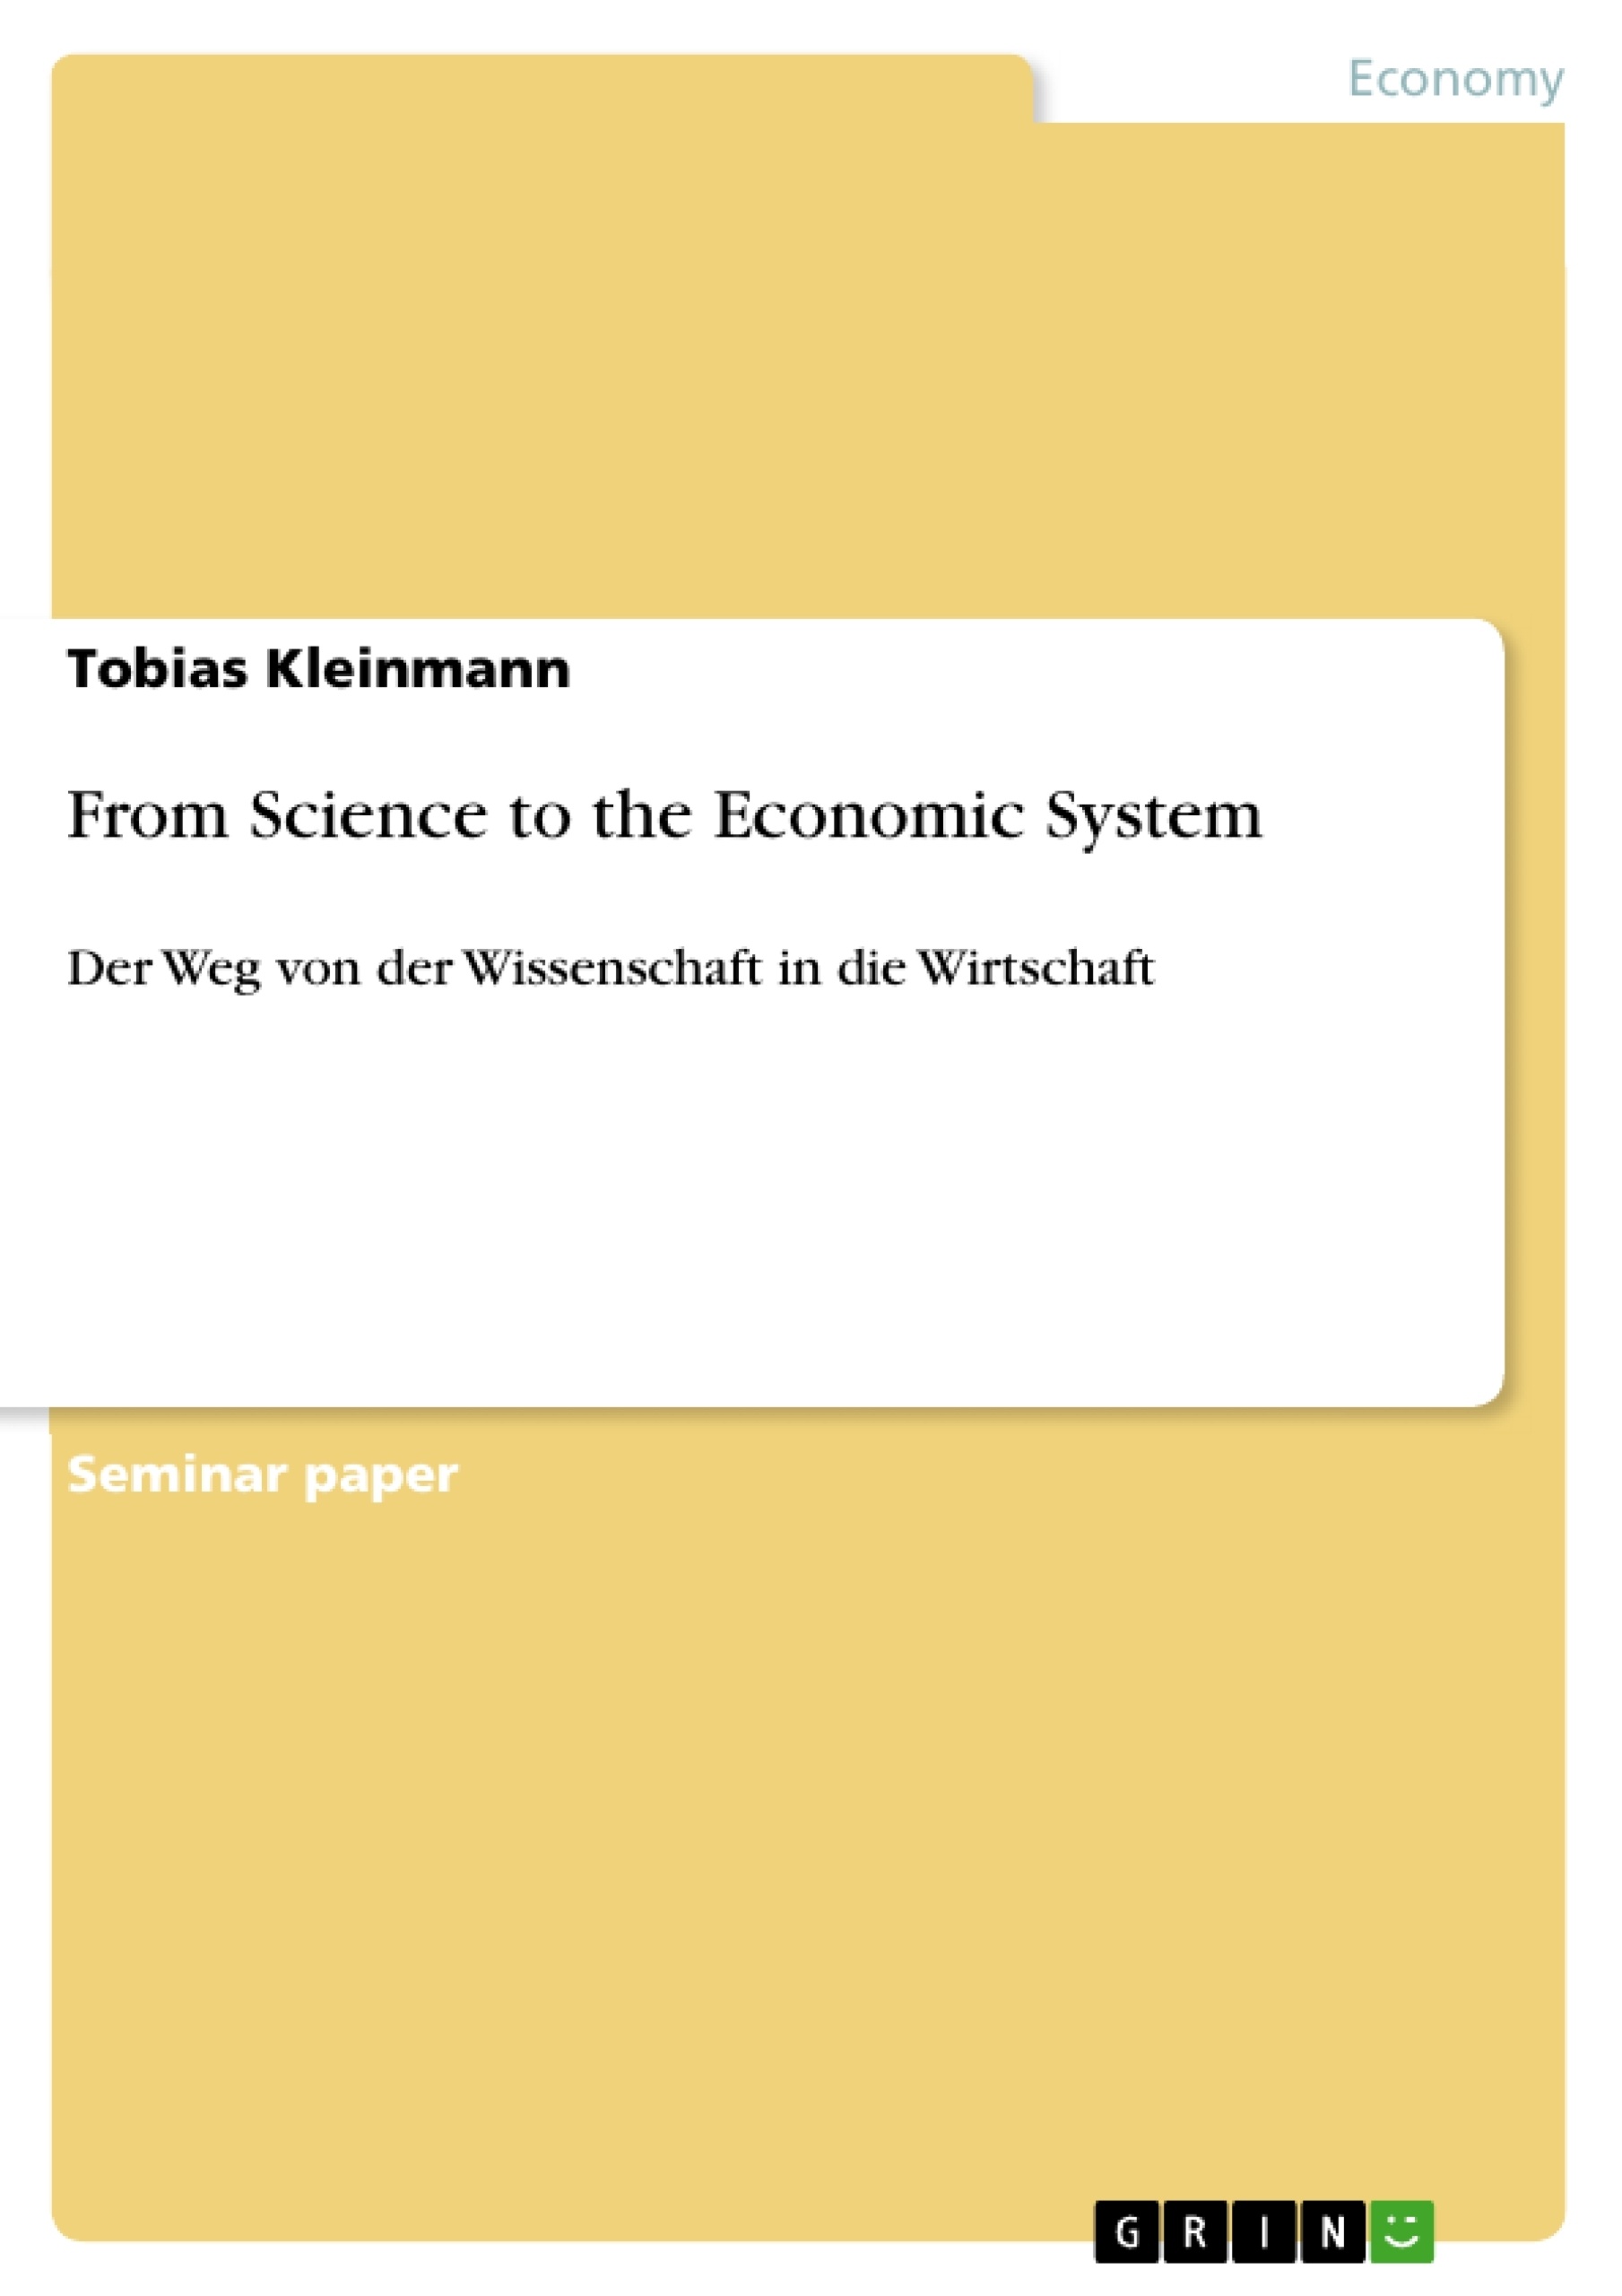 Title: From Science to the Economic System